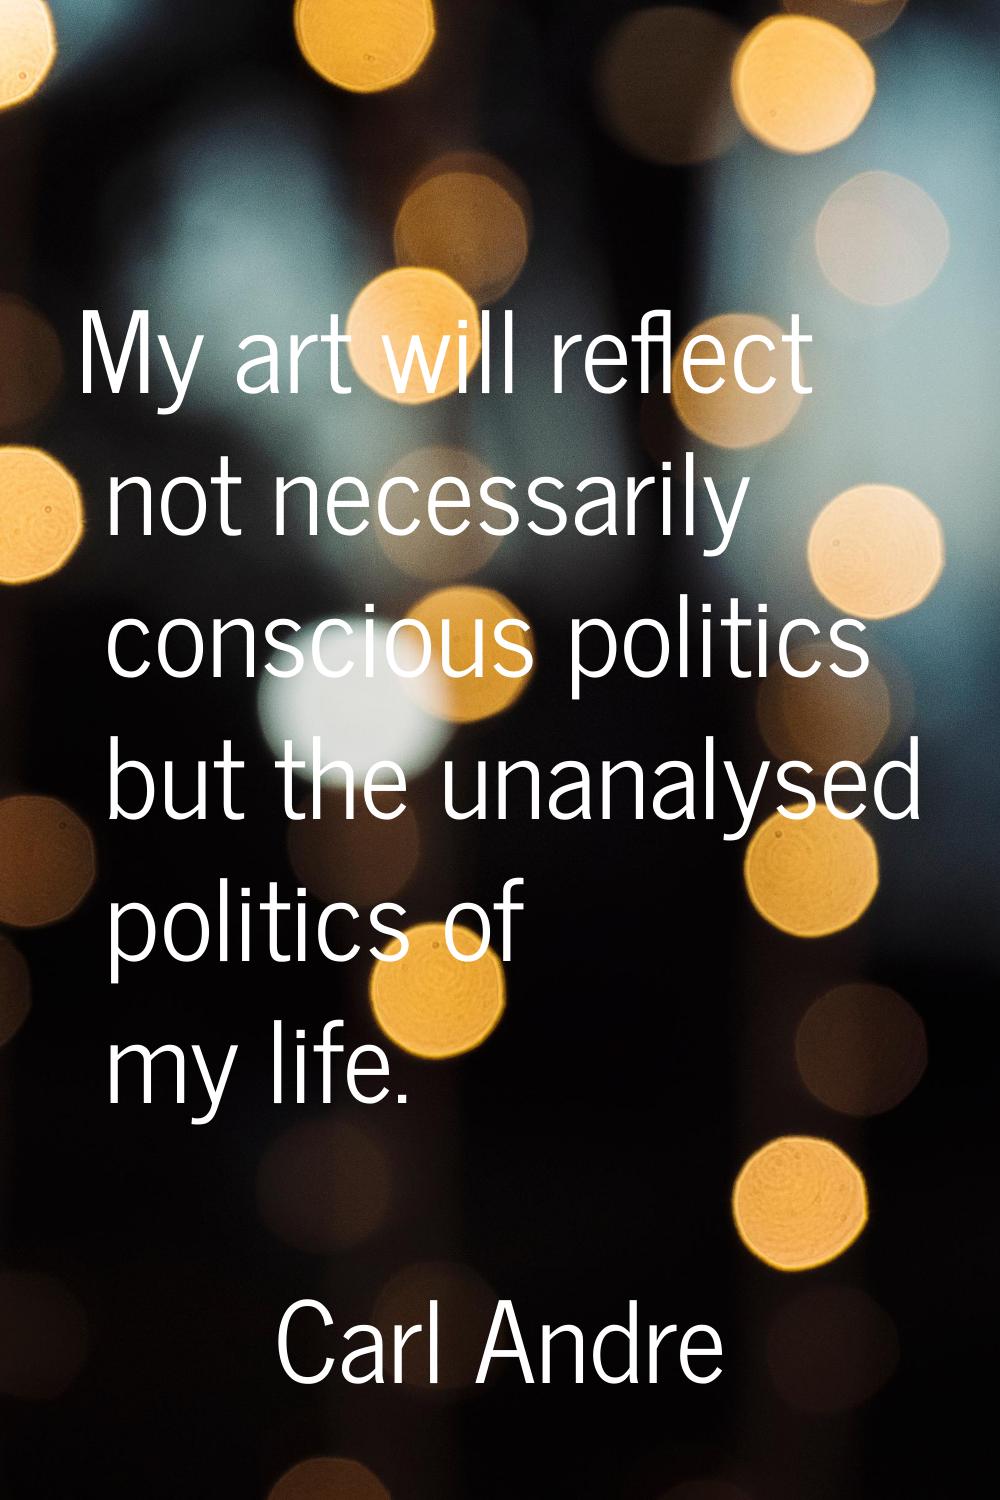 My art will reflect not necessarily conscious politics but the unanalysed politics of my life.